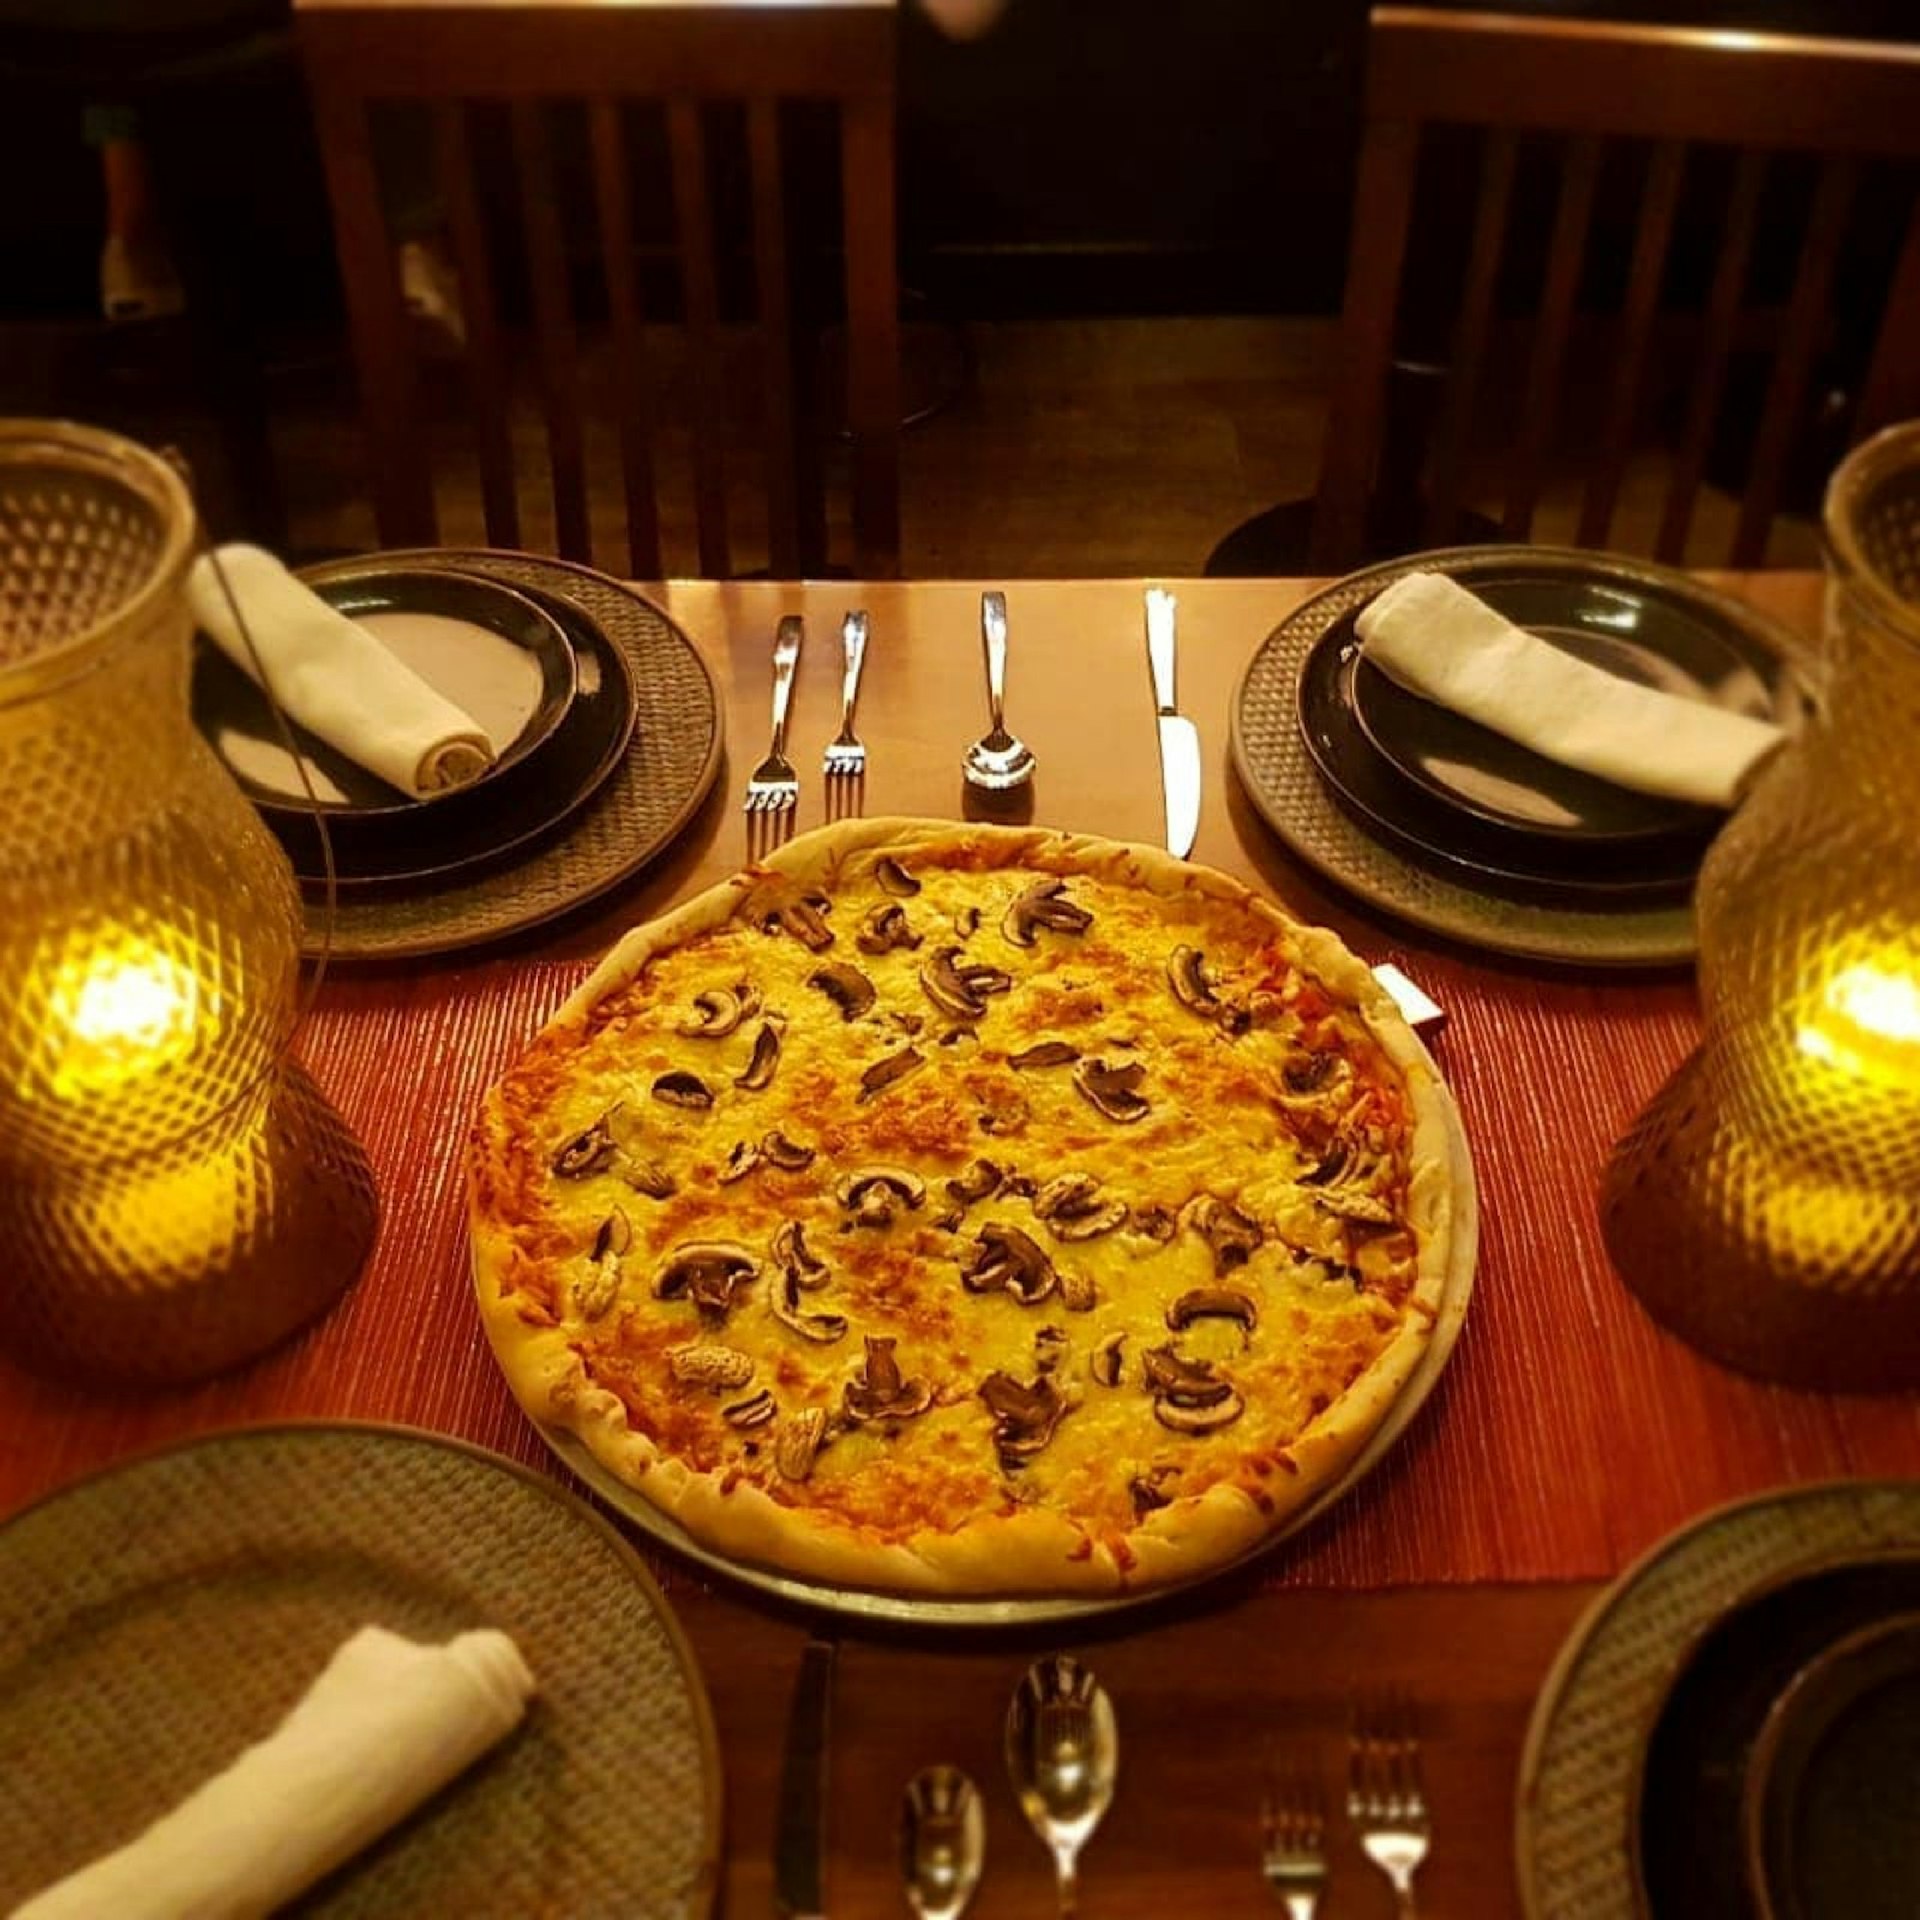 A pizza sits in the middle of a table at El Taller restaurant surrounded by plates and silver utensils. Everything is illuminated by a pair of candles in glass containers. 